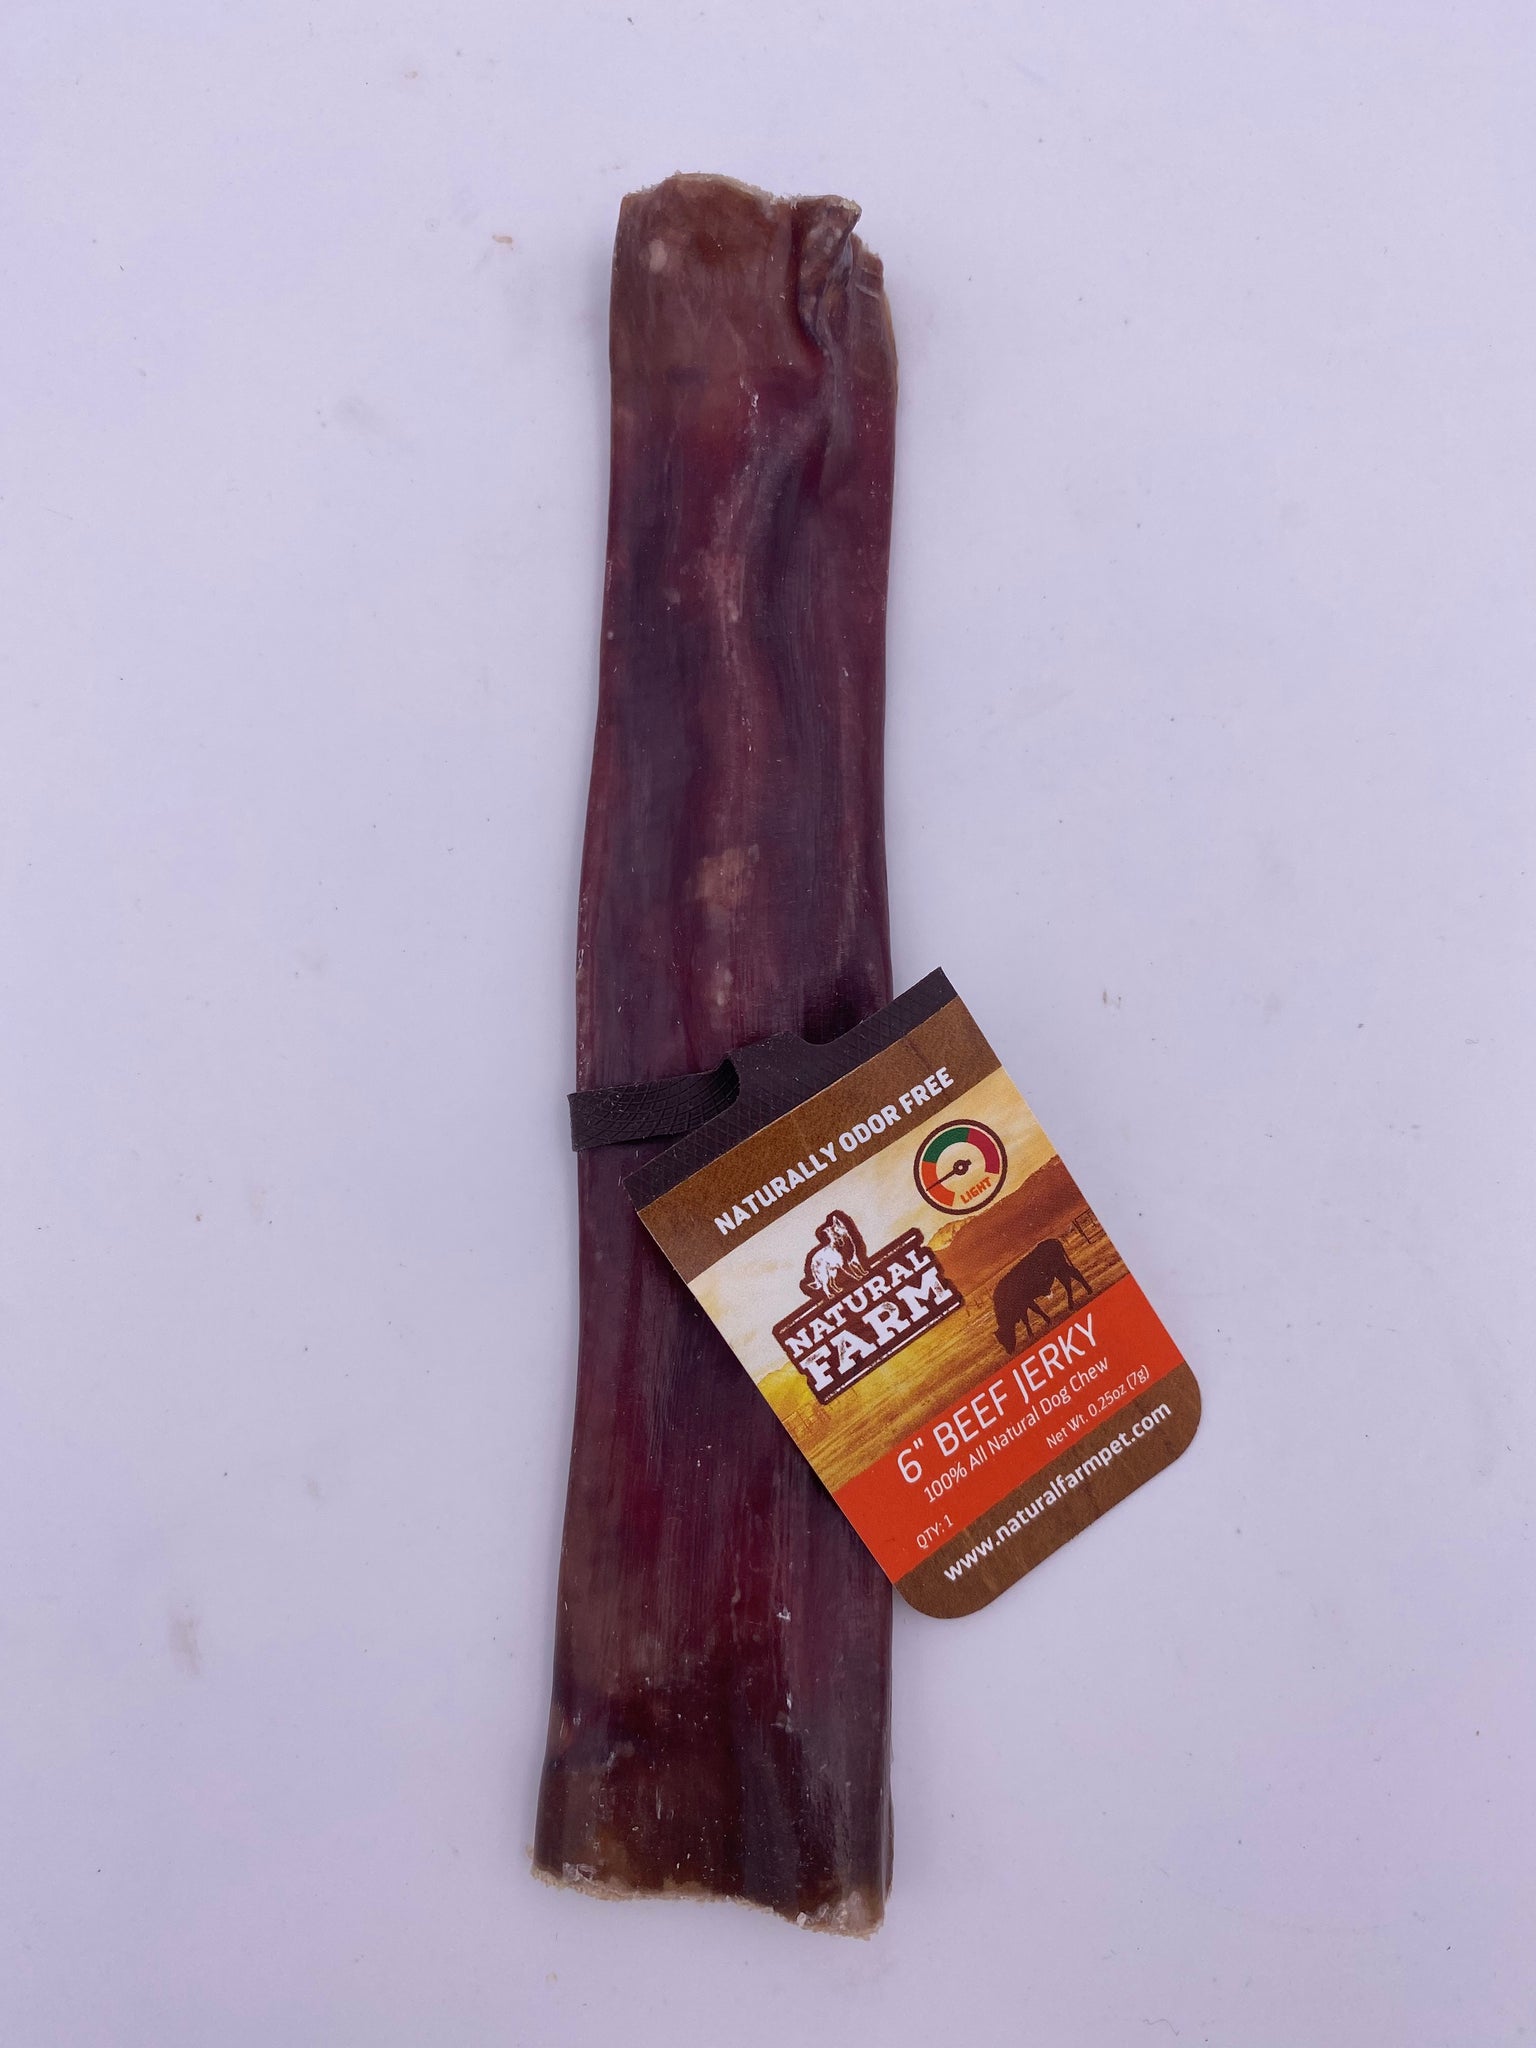 6 Inch Natural Farm Beef Jerky